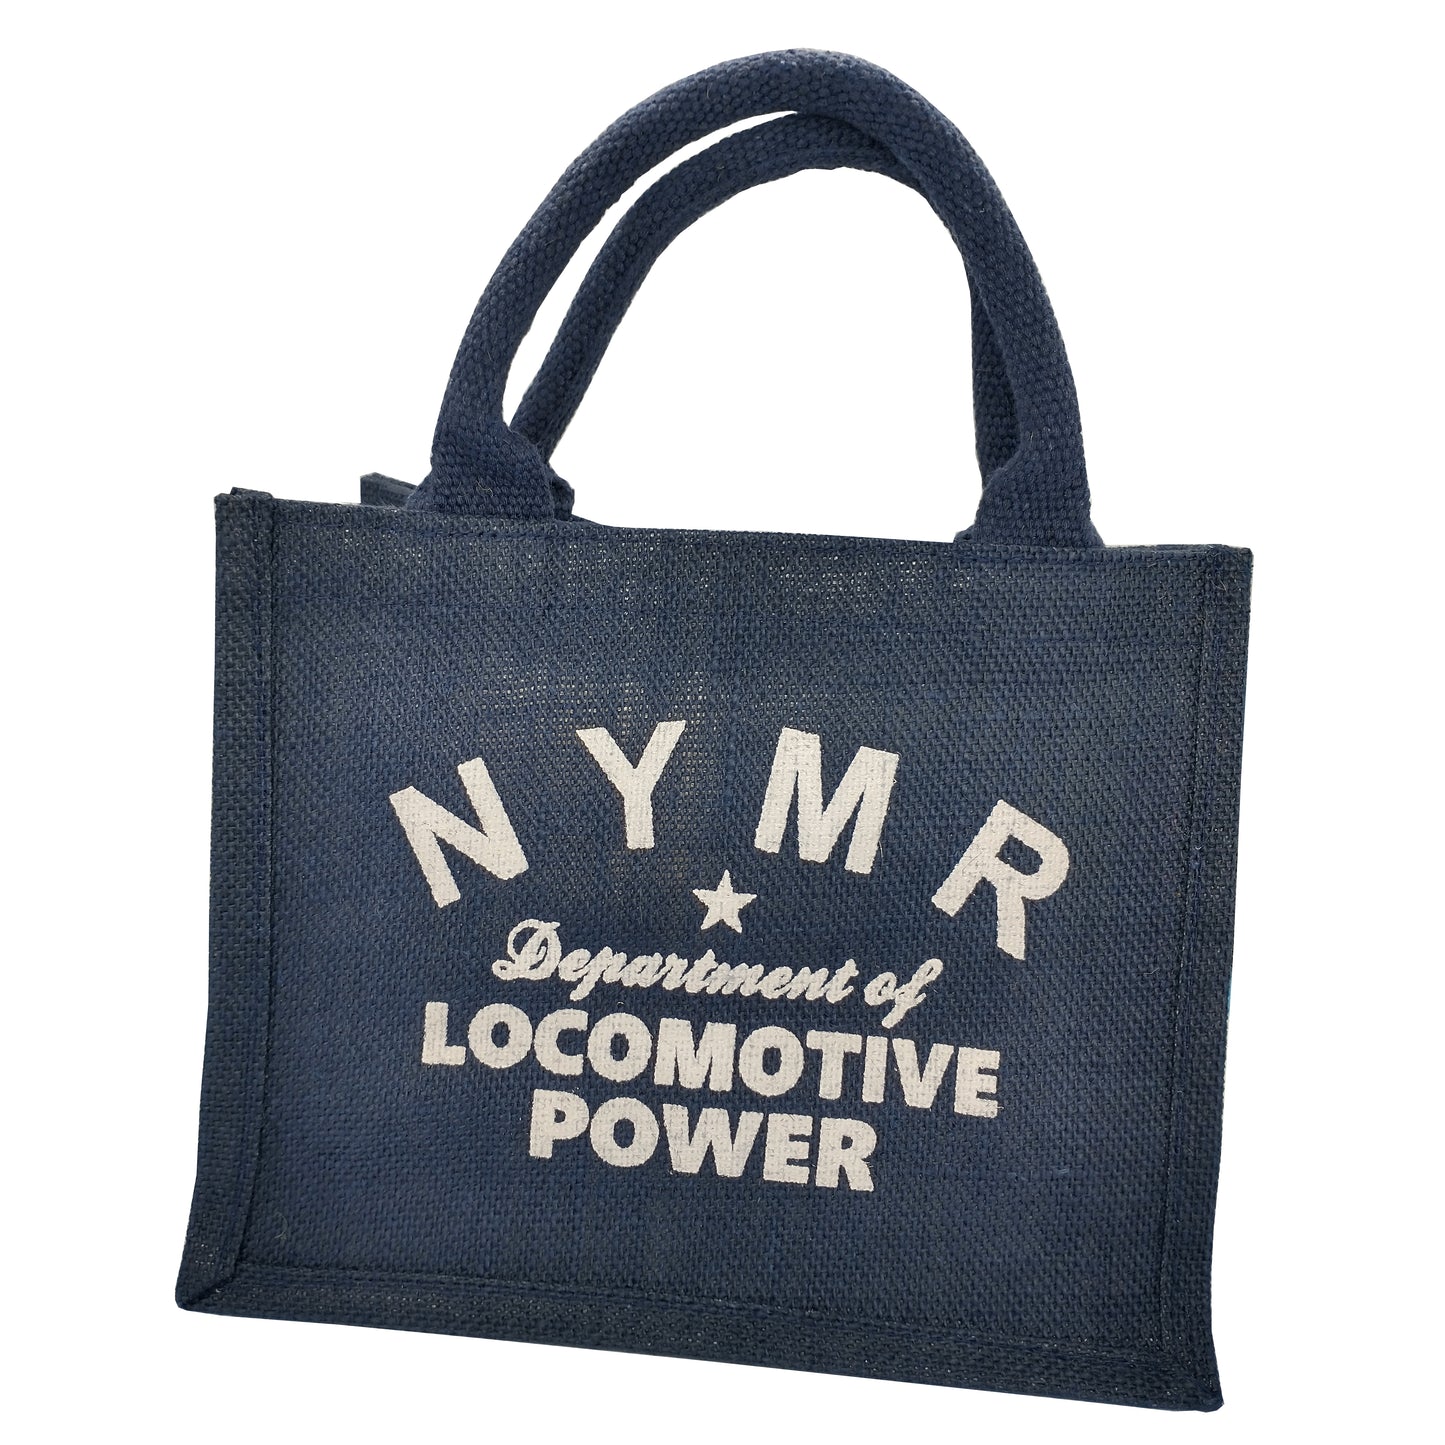 Small blue jute shopping bag with N Y M R Locomotive Power logo printed in white on front.